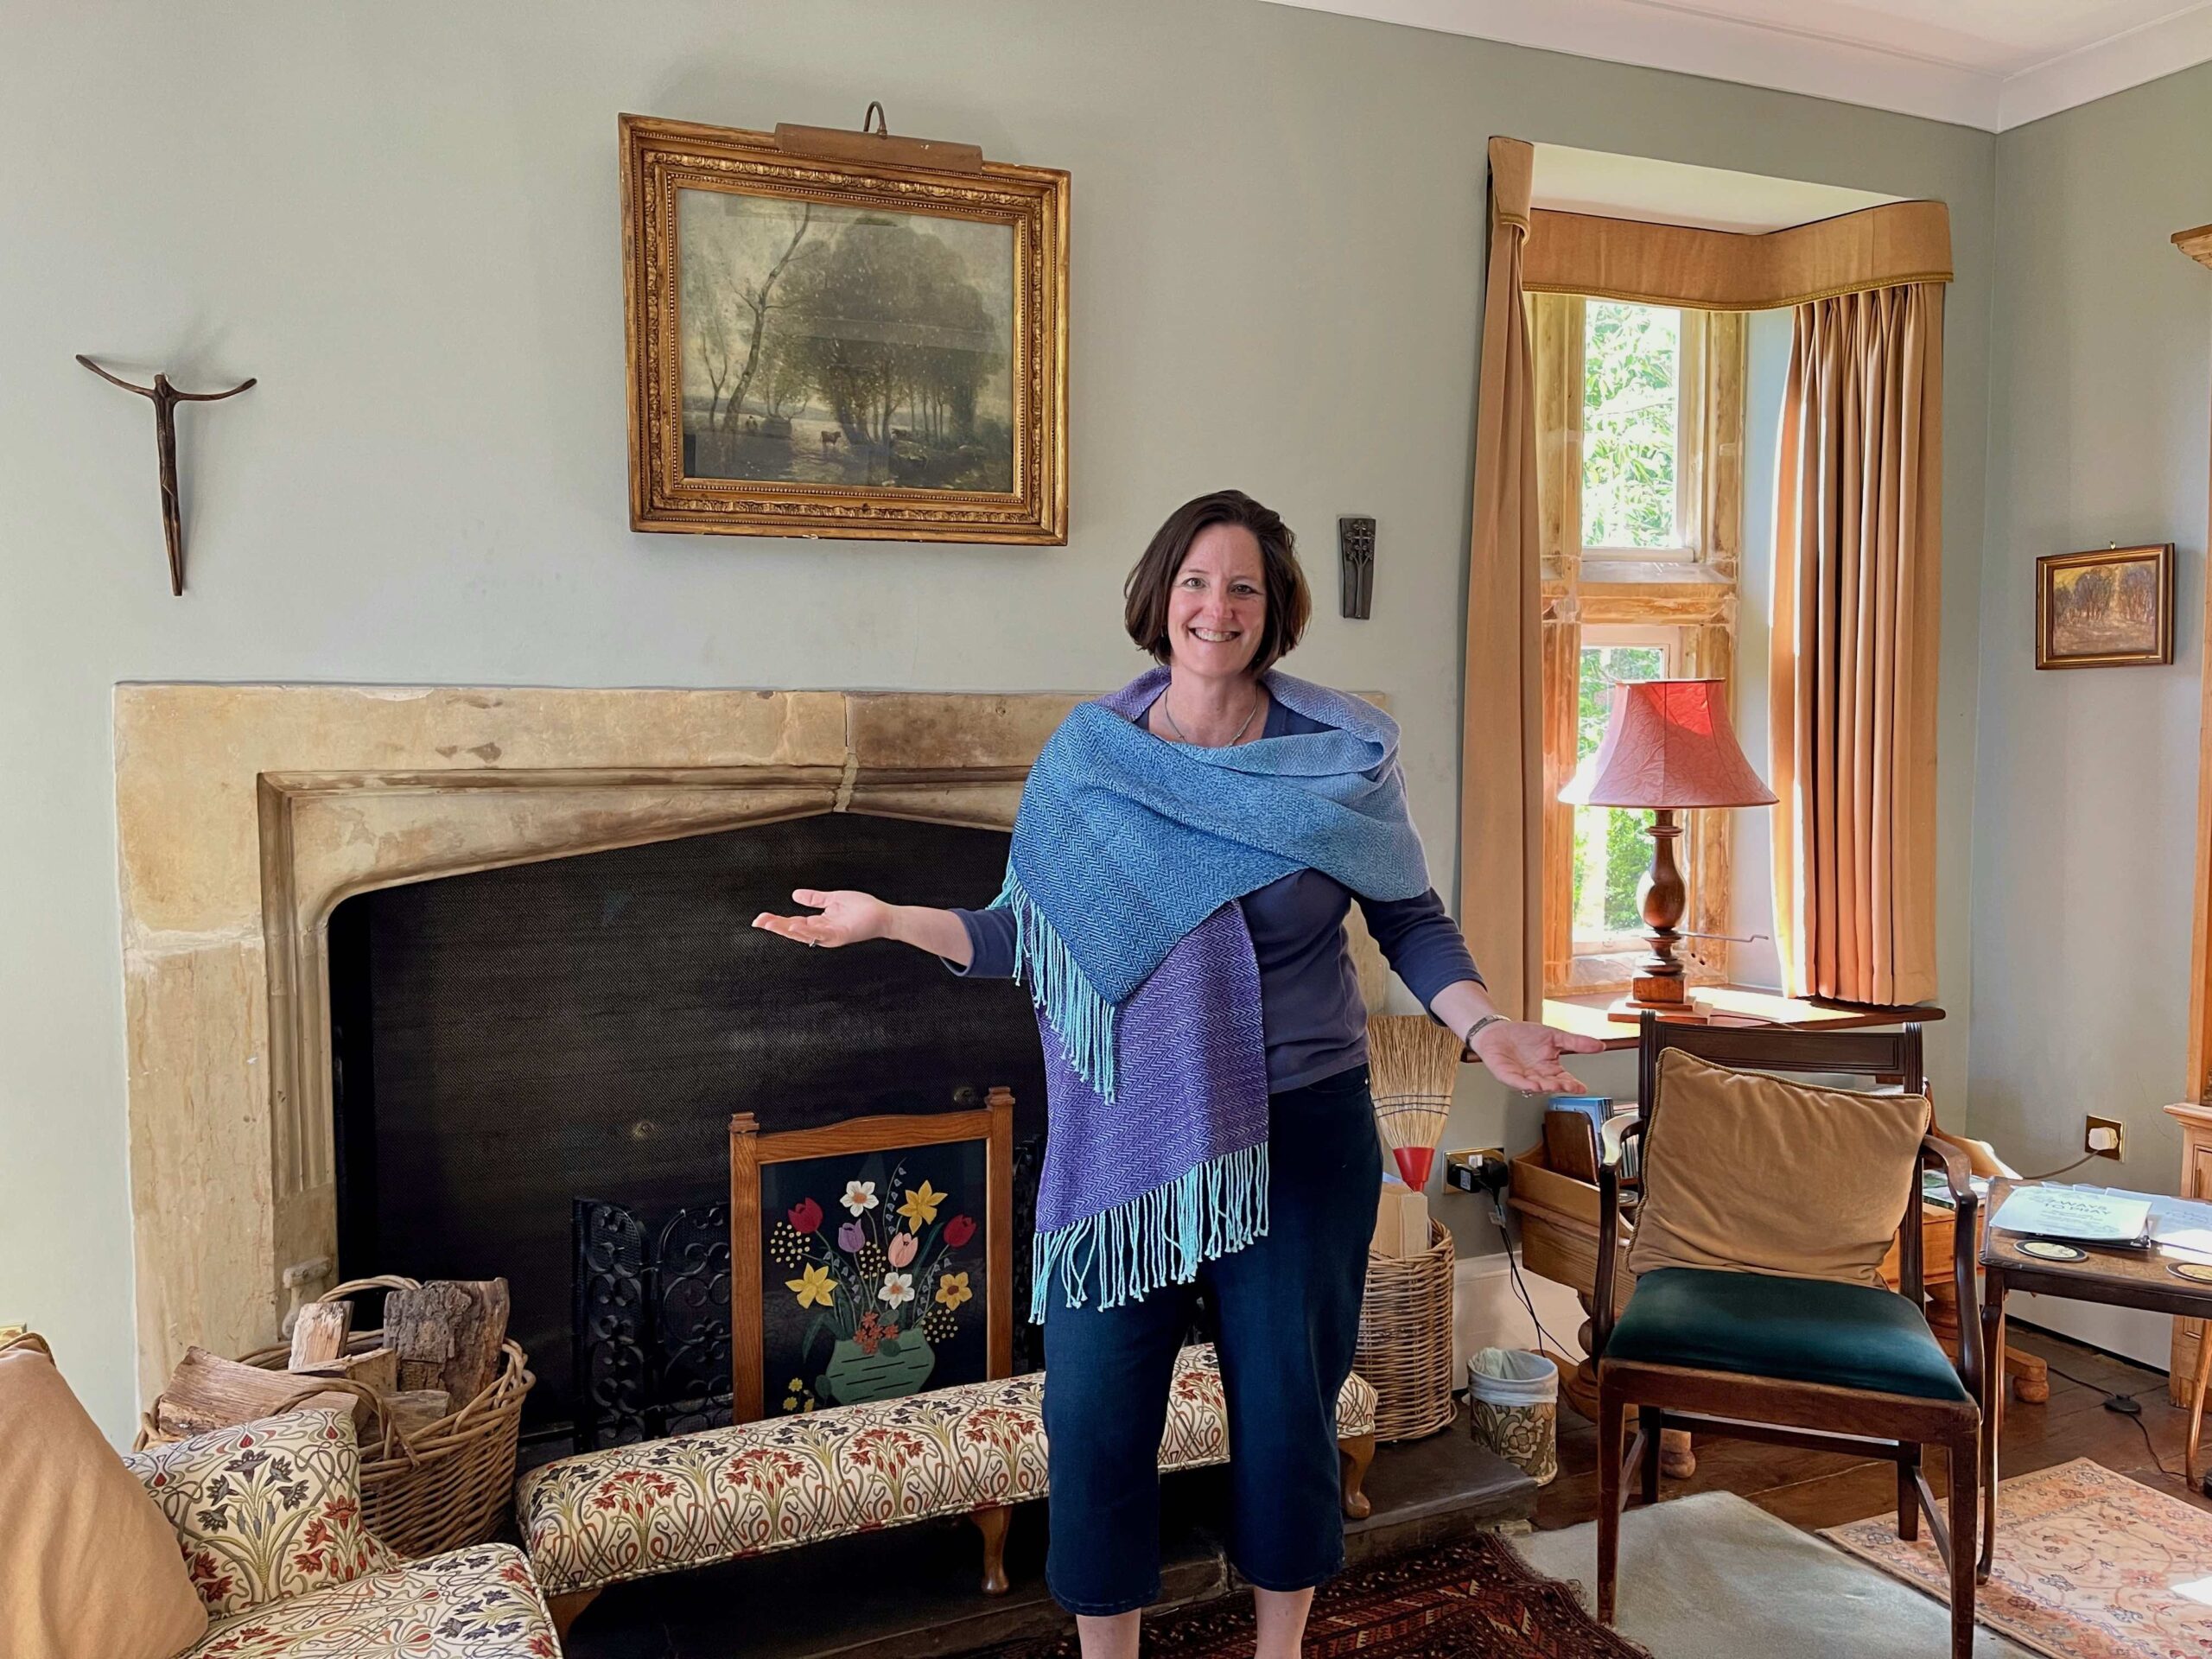 Amy in front of the fireplace at Penhurst Retreat Centre, wearing the beautiful blue and purple prayer shawl.